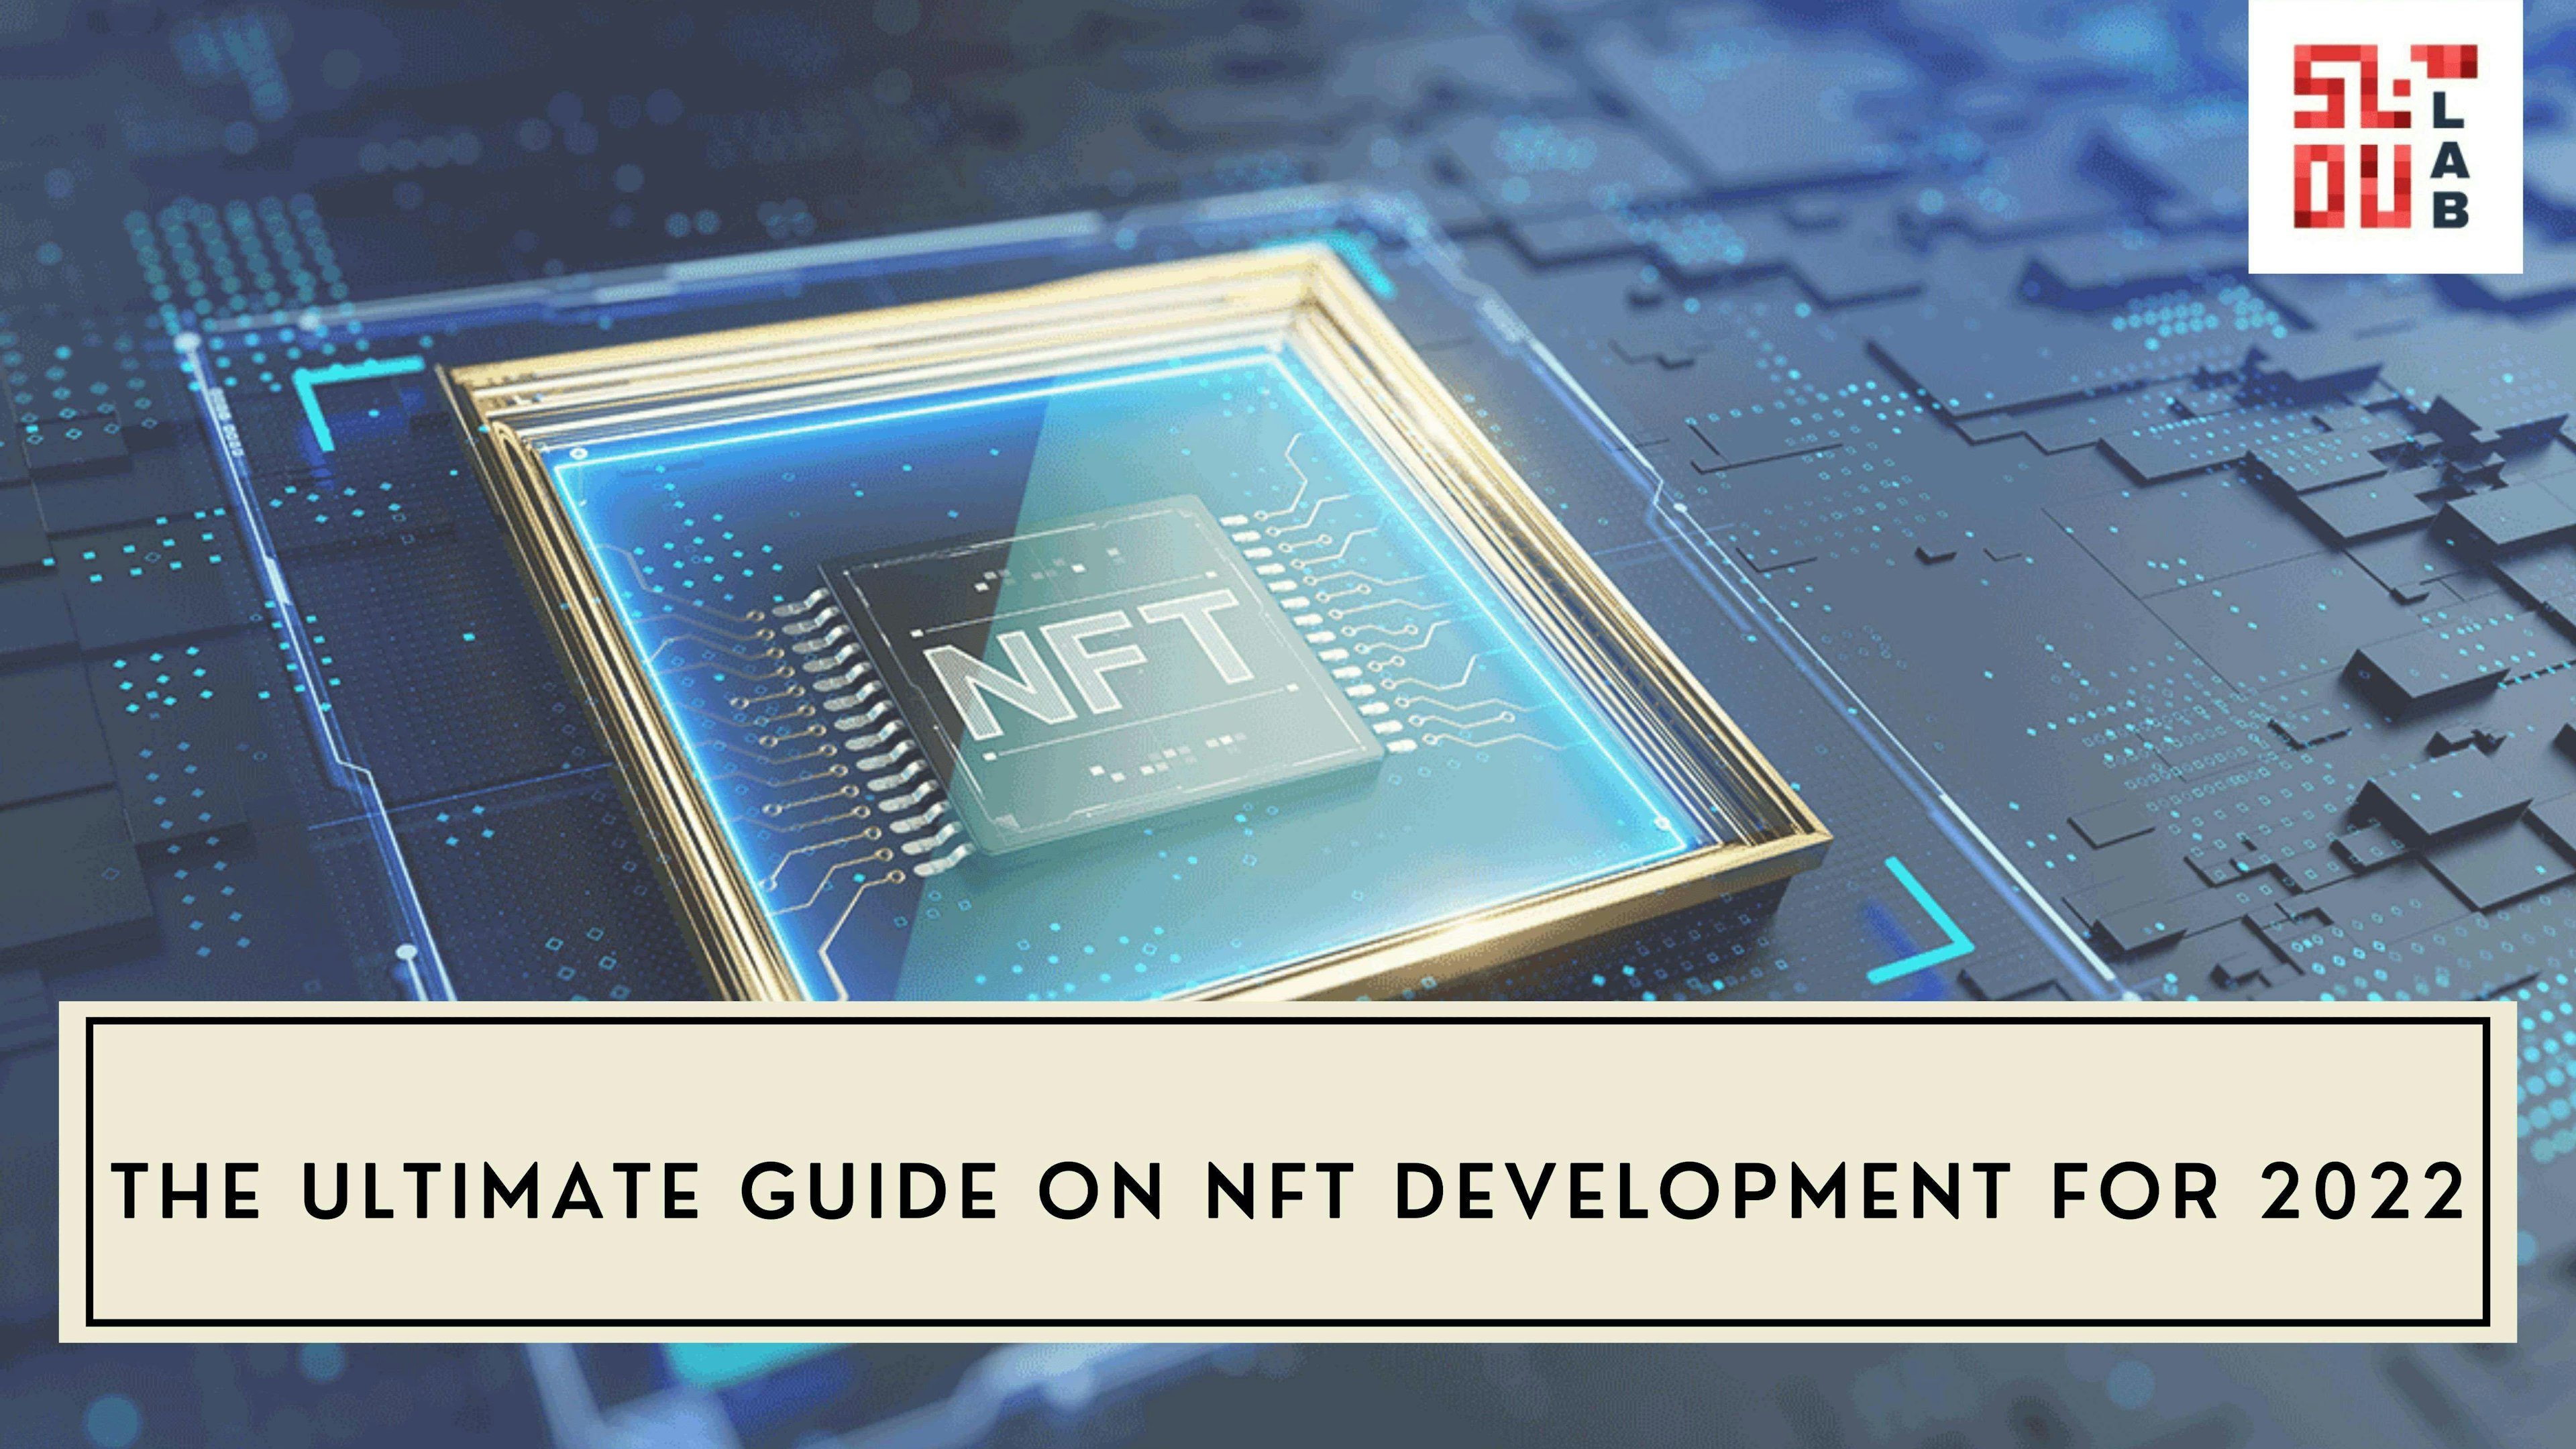 The Ultimate Guide on NFT Development for 2022